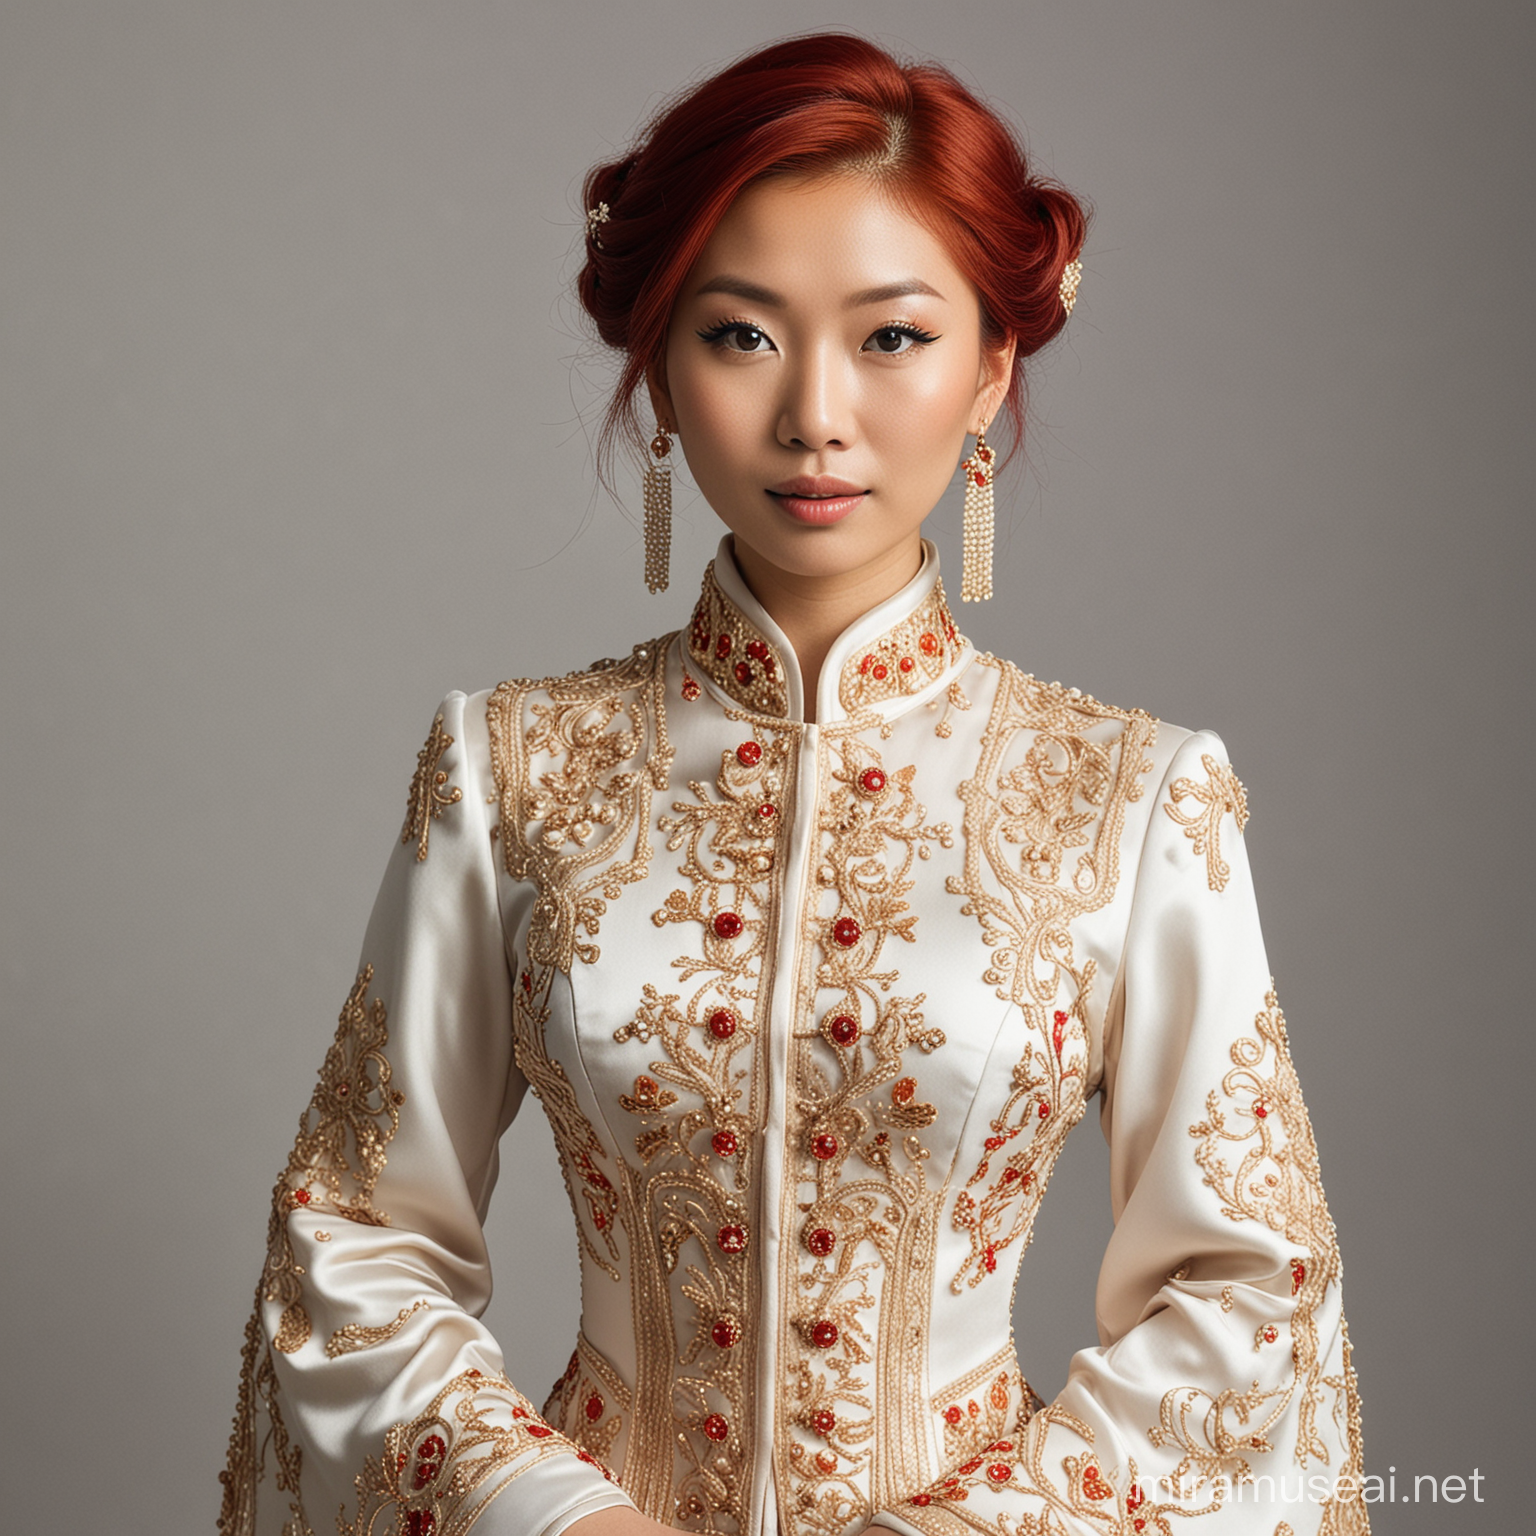 Elegant Asian Woman with Vibrant Red Hair in Exquisite Attire